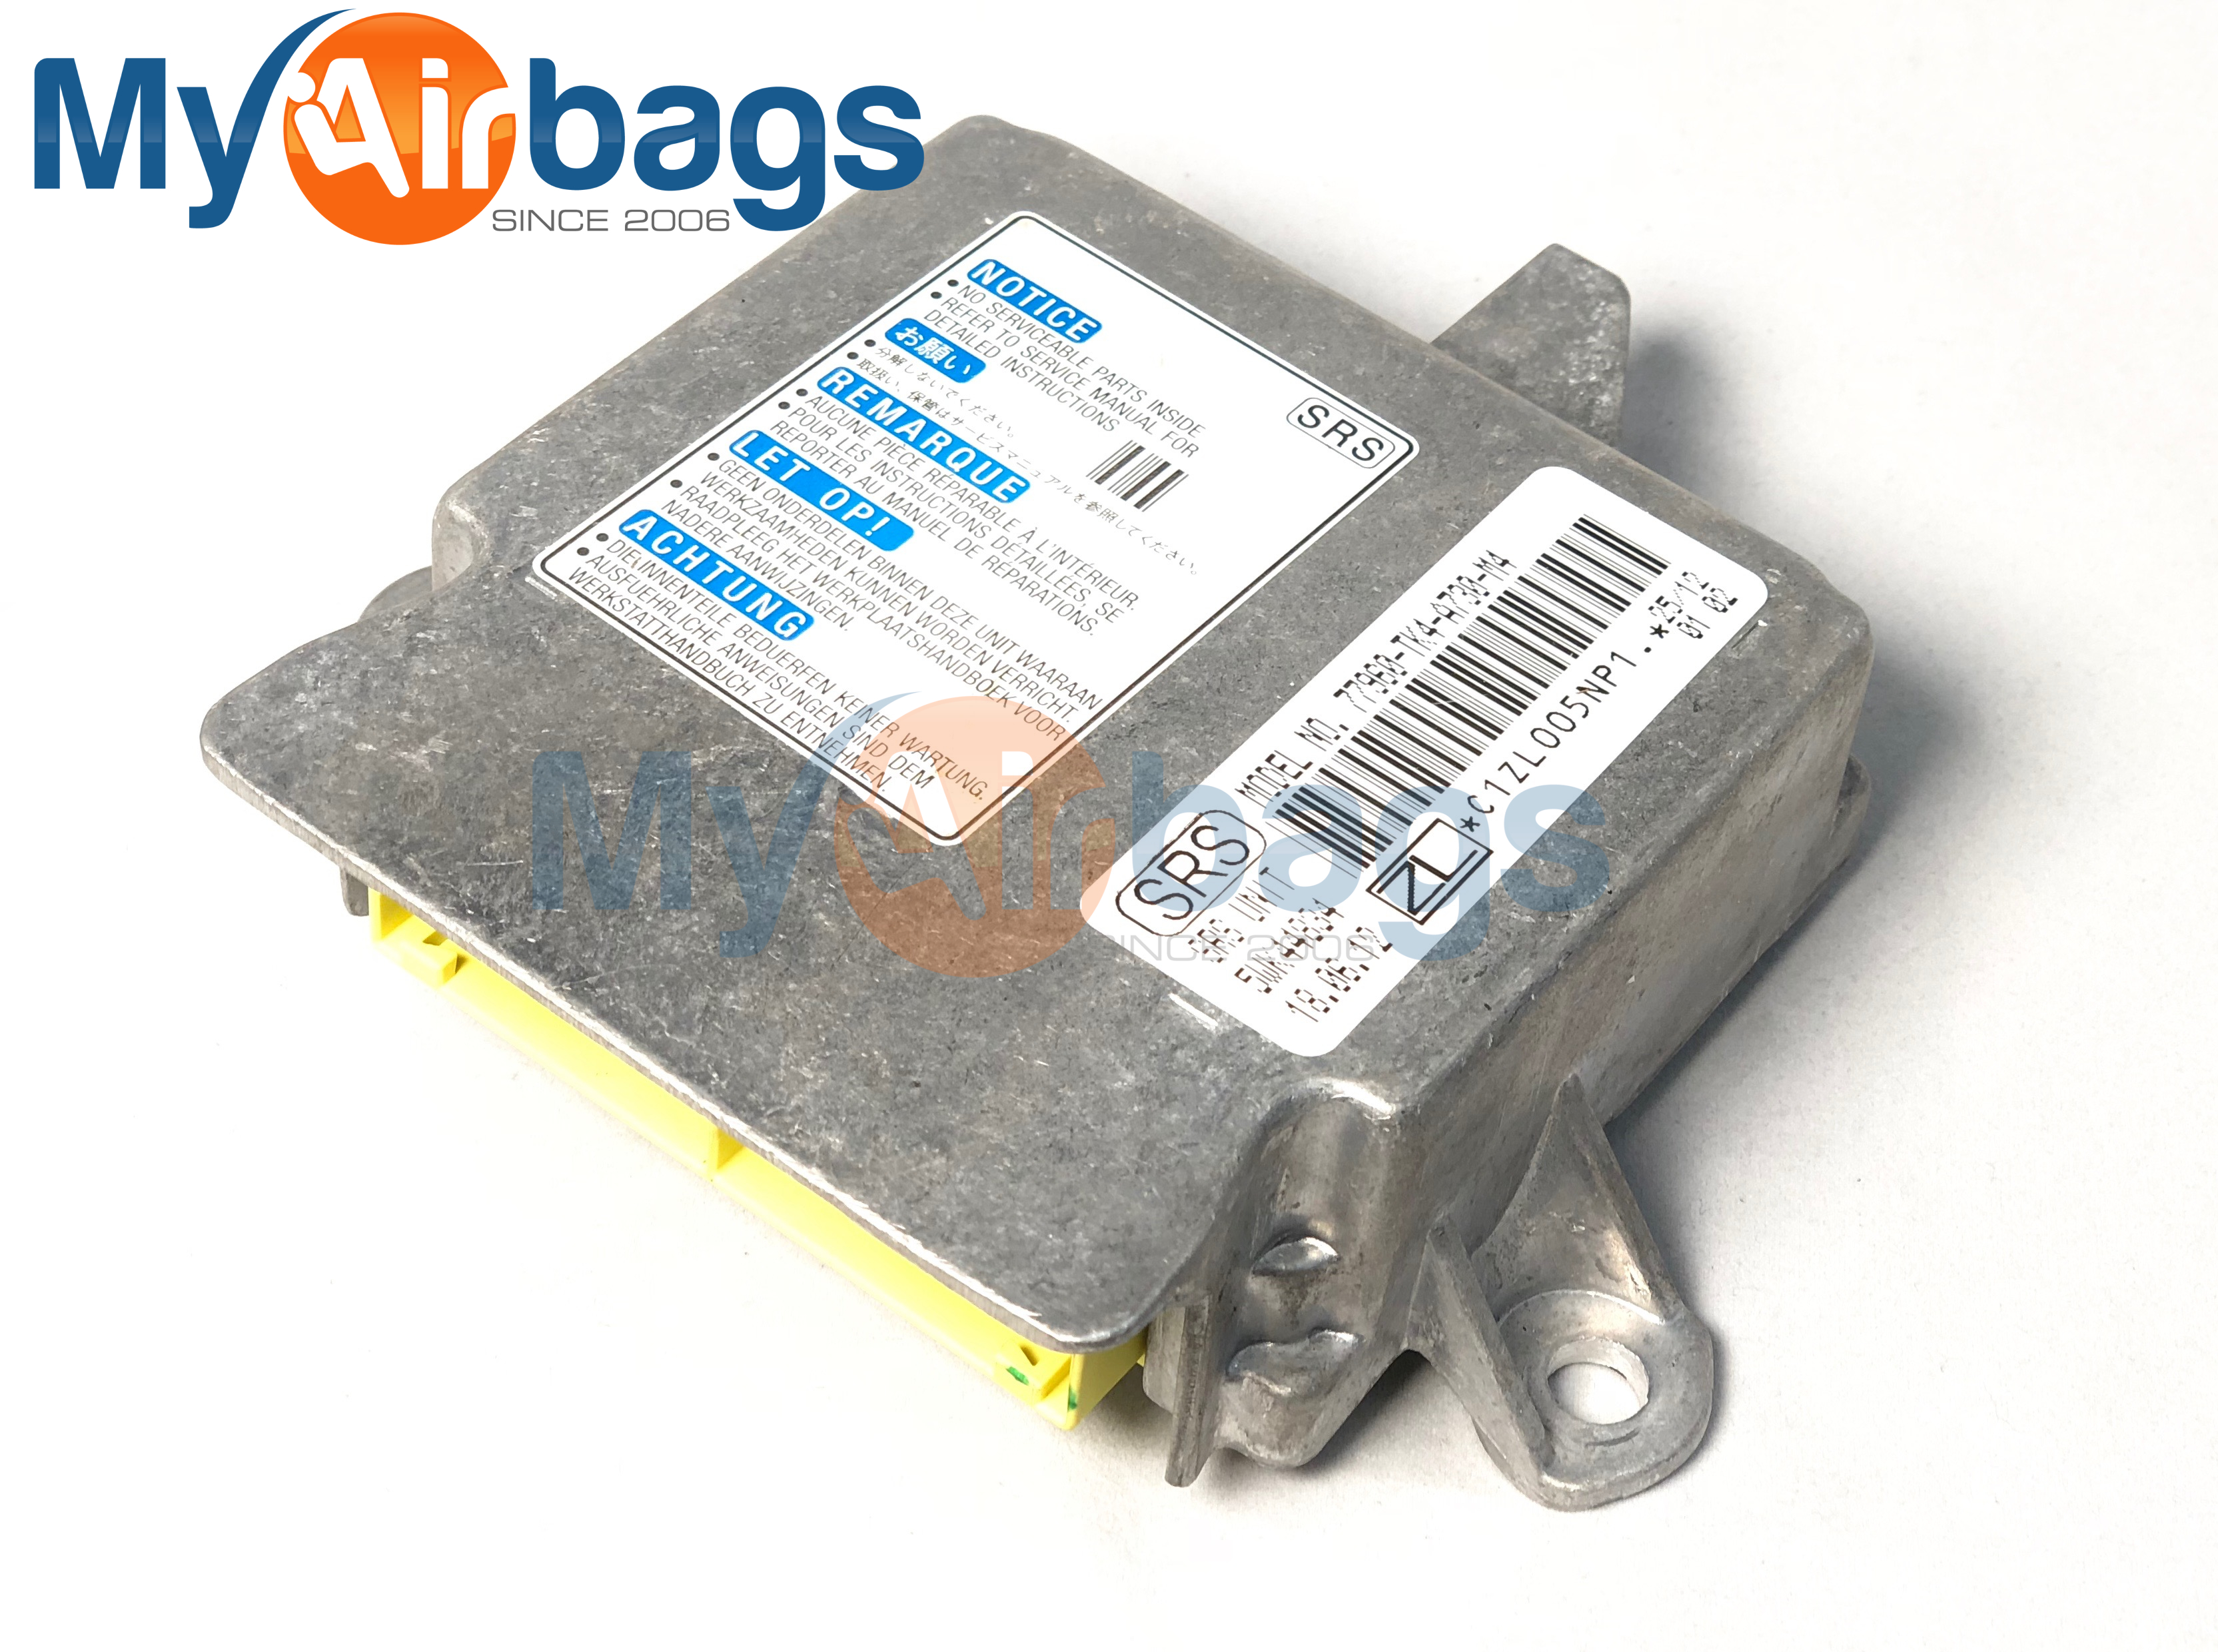 ACURA TLX SRS Airbag Computer Diagnostic Control Module PART #77960TK4A730